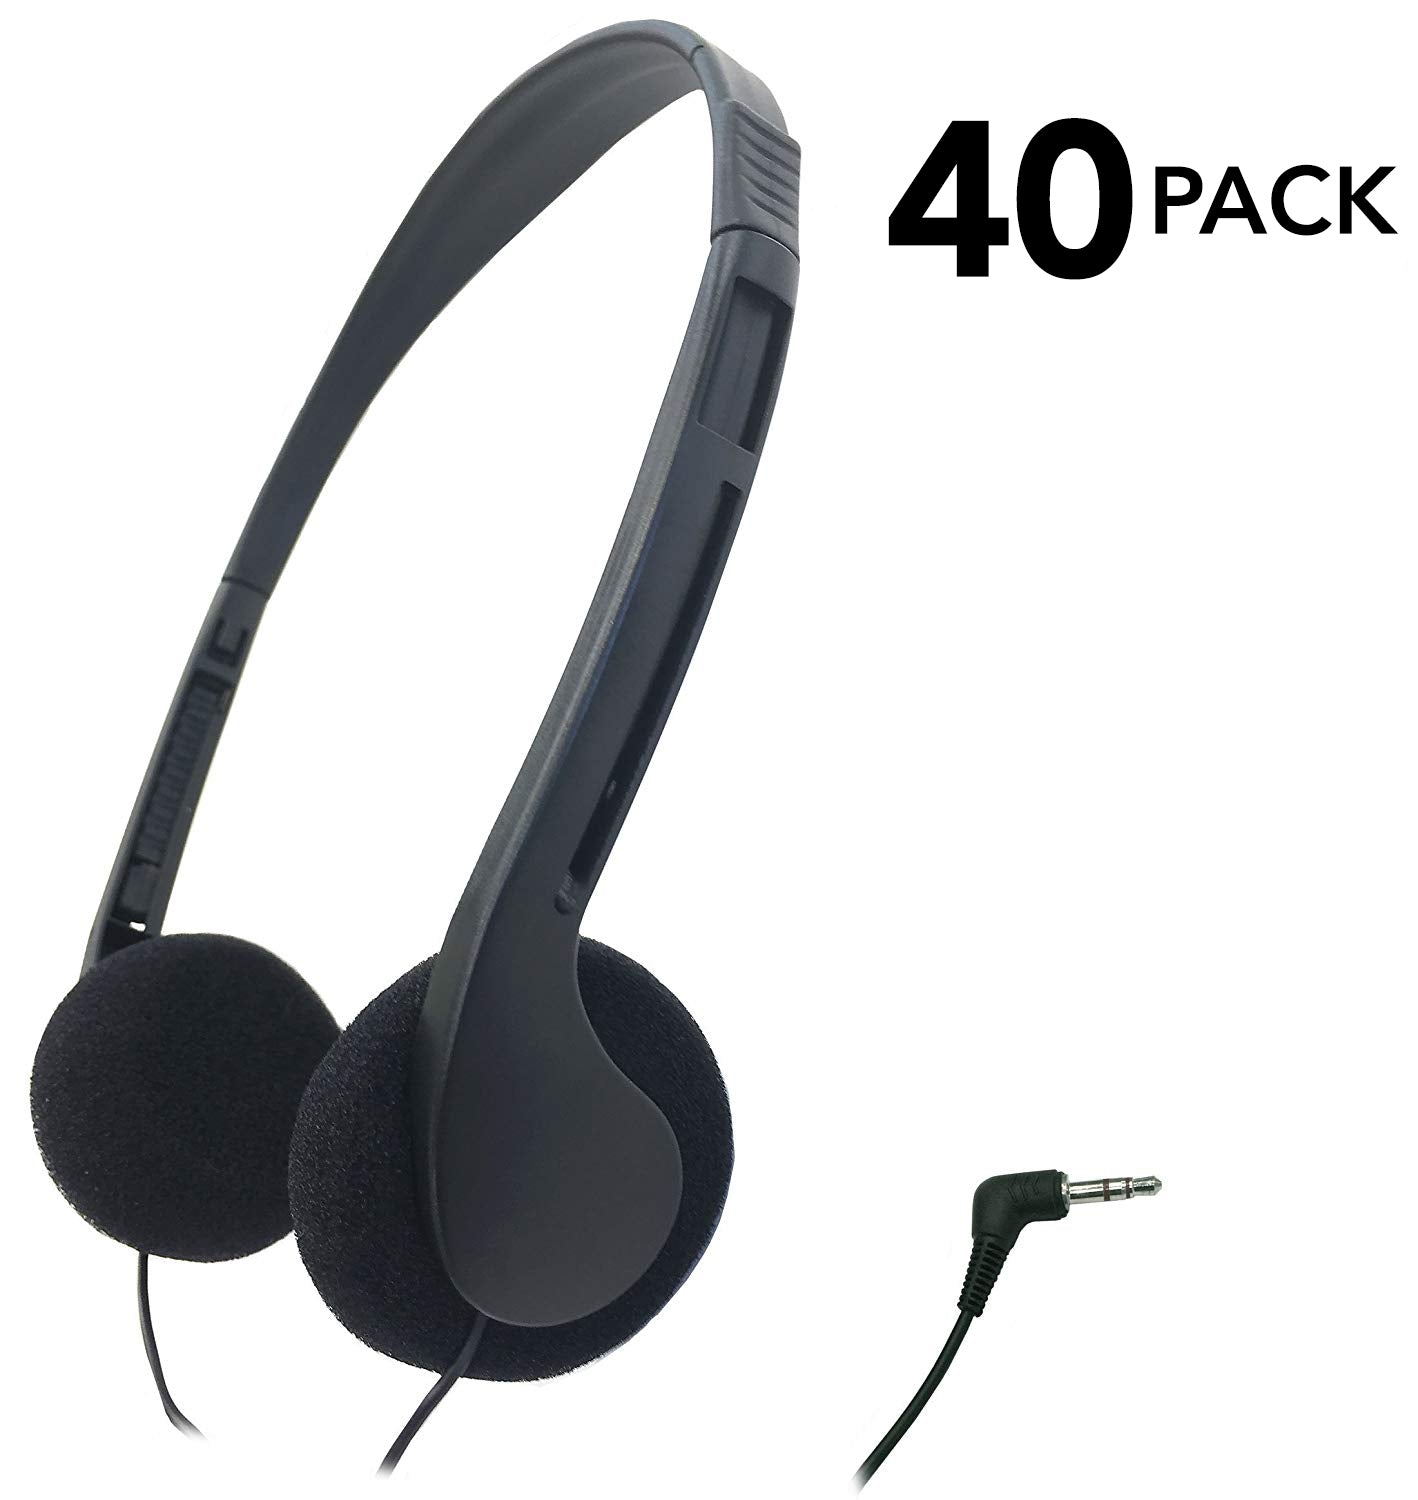 Bulk pack of 40 black classroom/library headphones by SmithOutlet